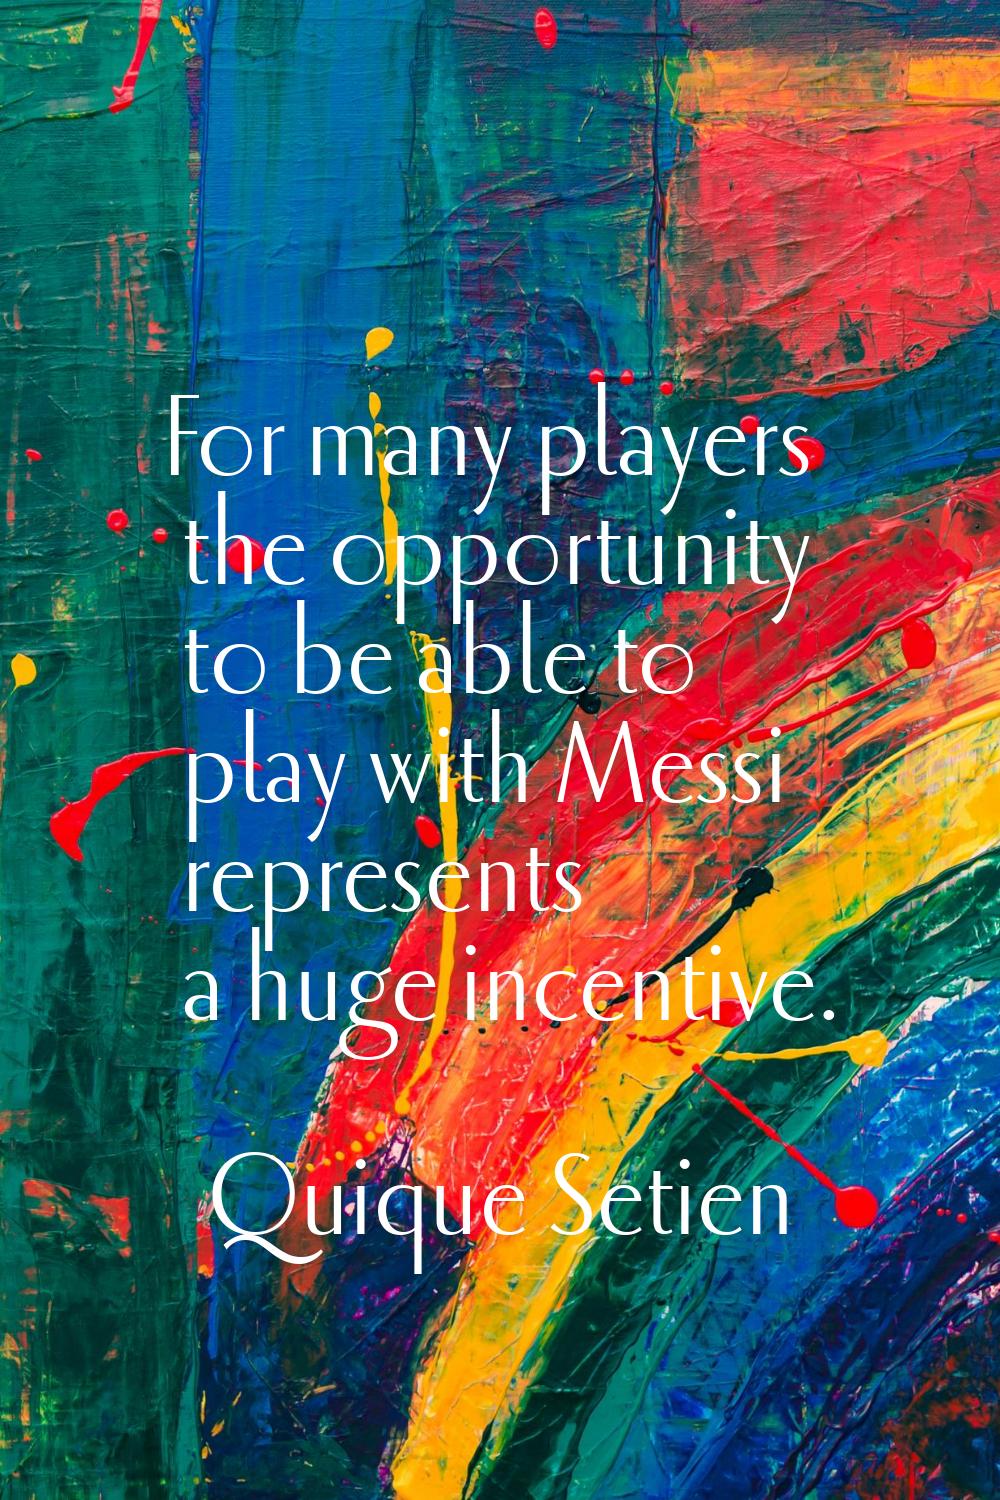 For many players the opportunity to be able to play with Messi represents a huge incentive.